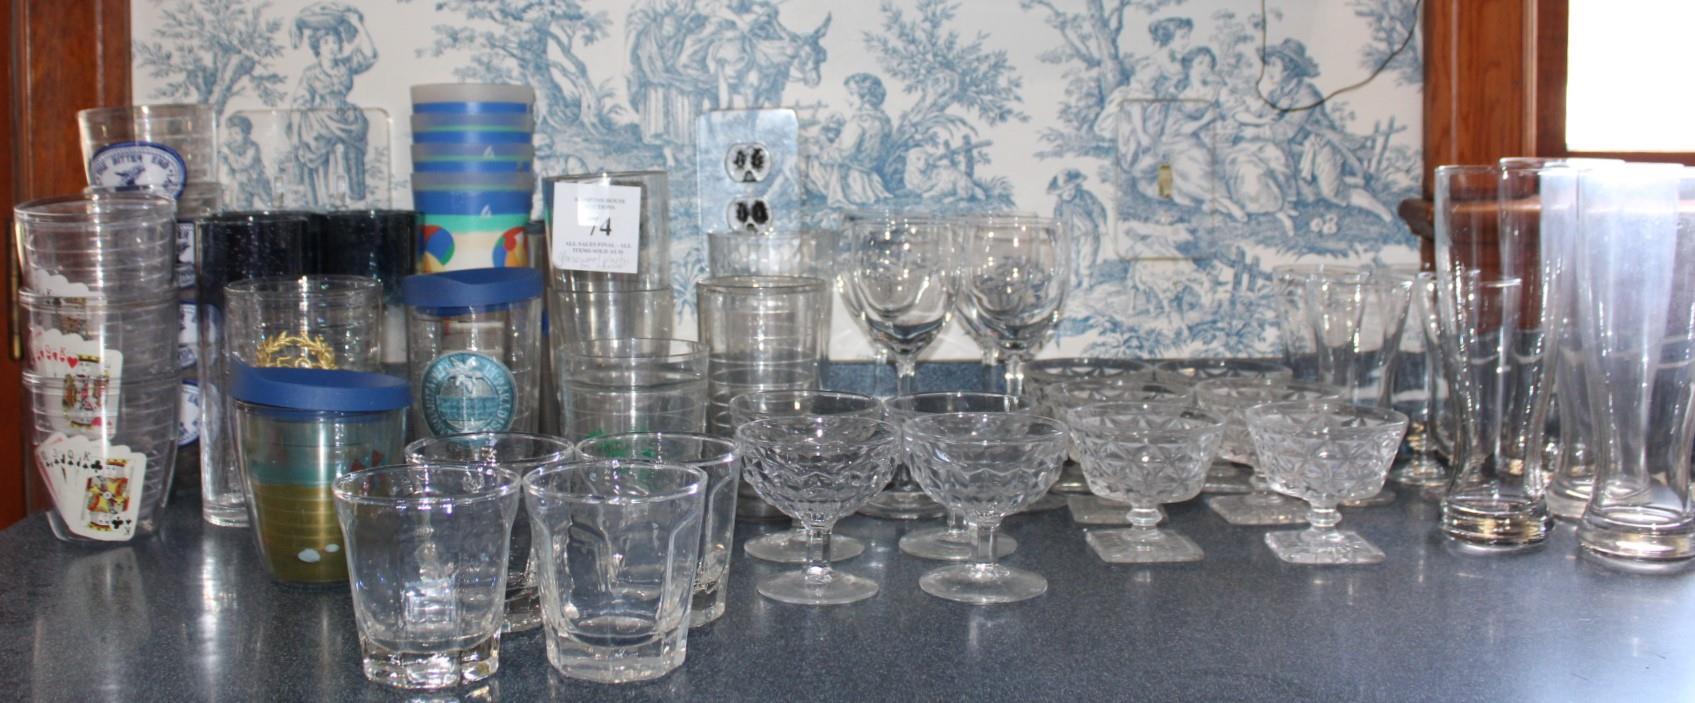 COUNTER TOP GROUP OF GLASS & ACRYLIC WARE